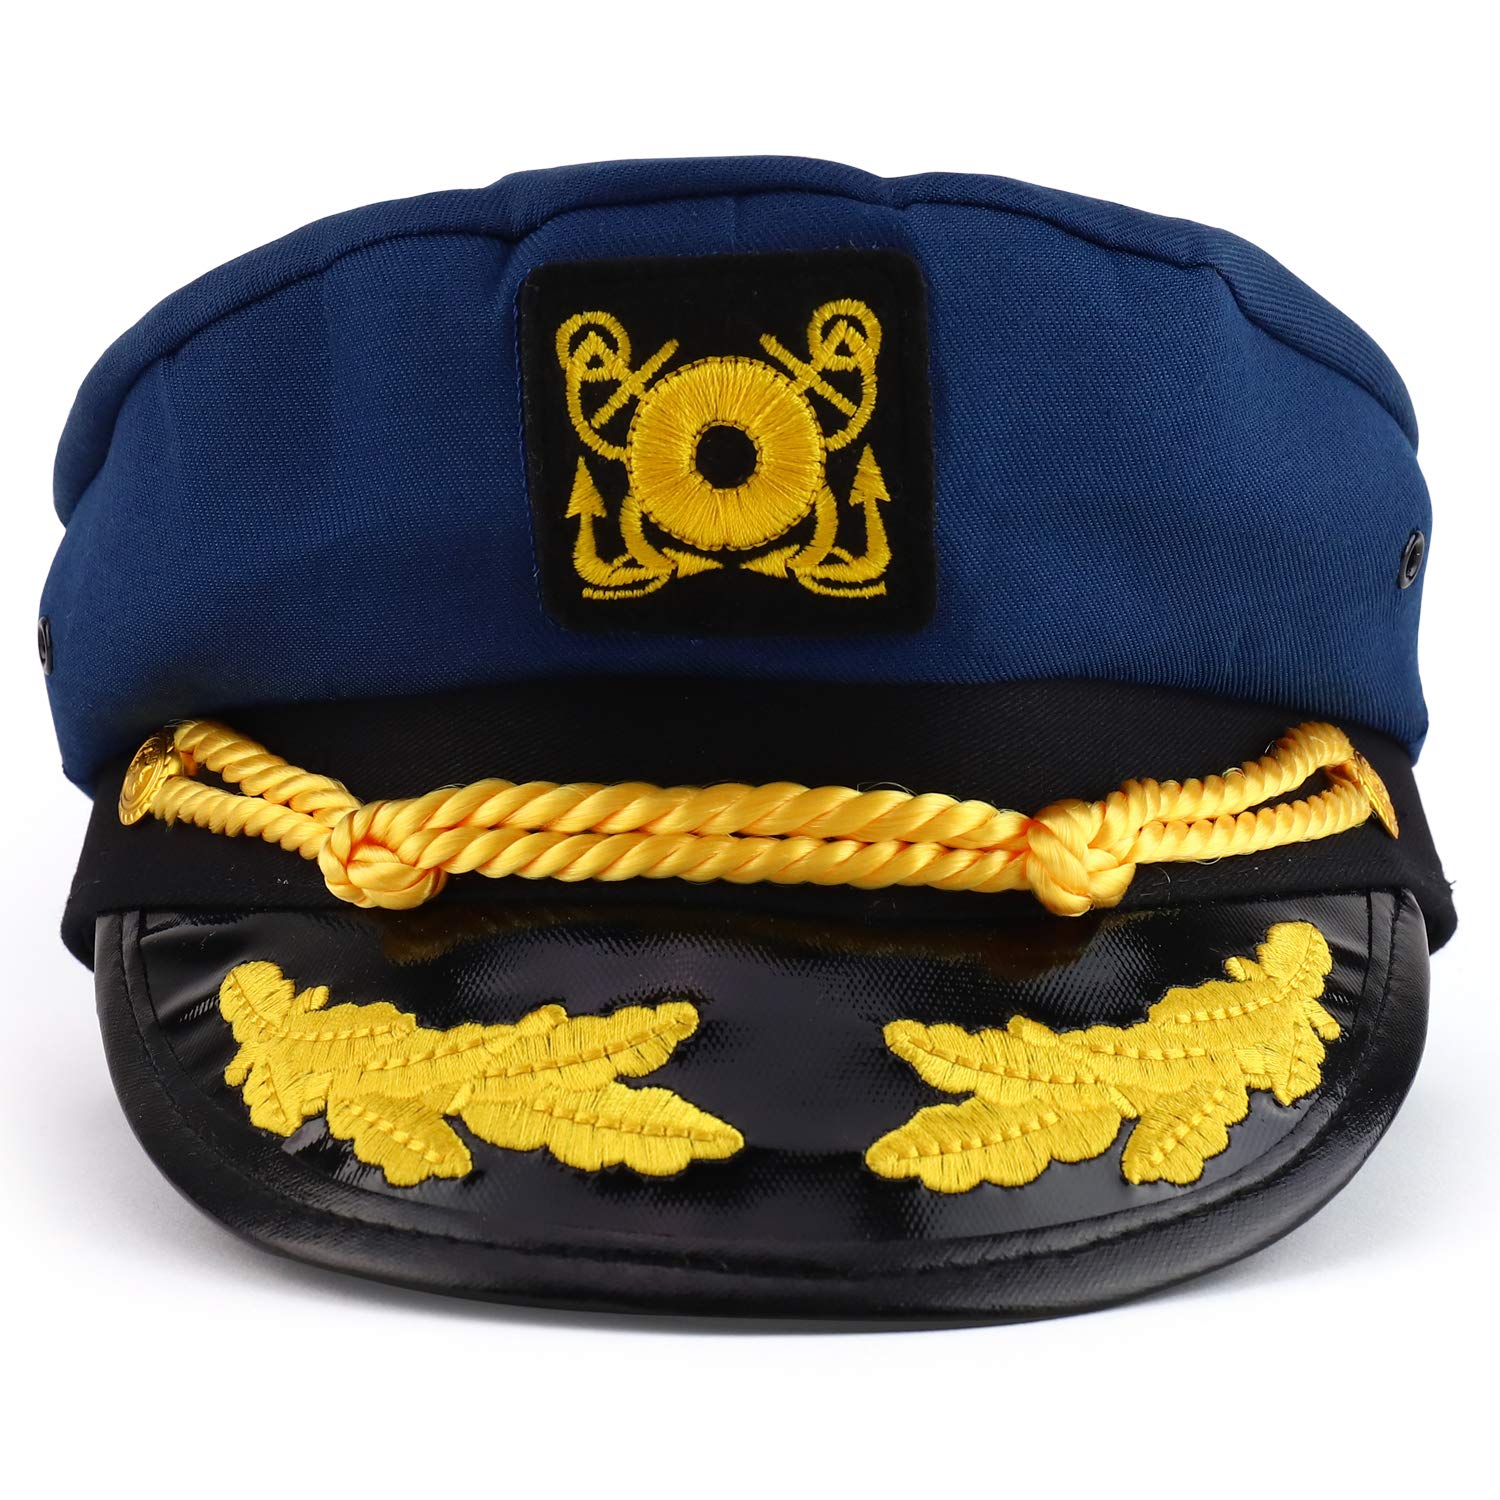 Armycrew Adult Size Cotton Yacht Sailor Captain Hat with Flagship Embroidered on The Bill